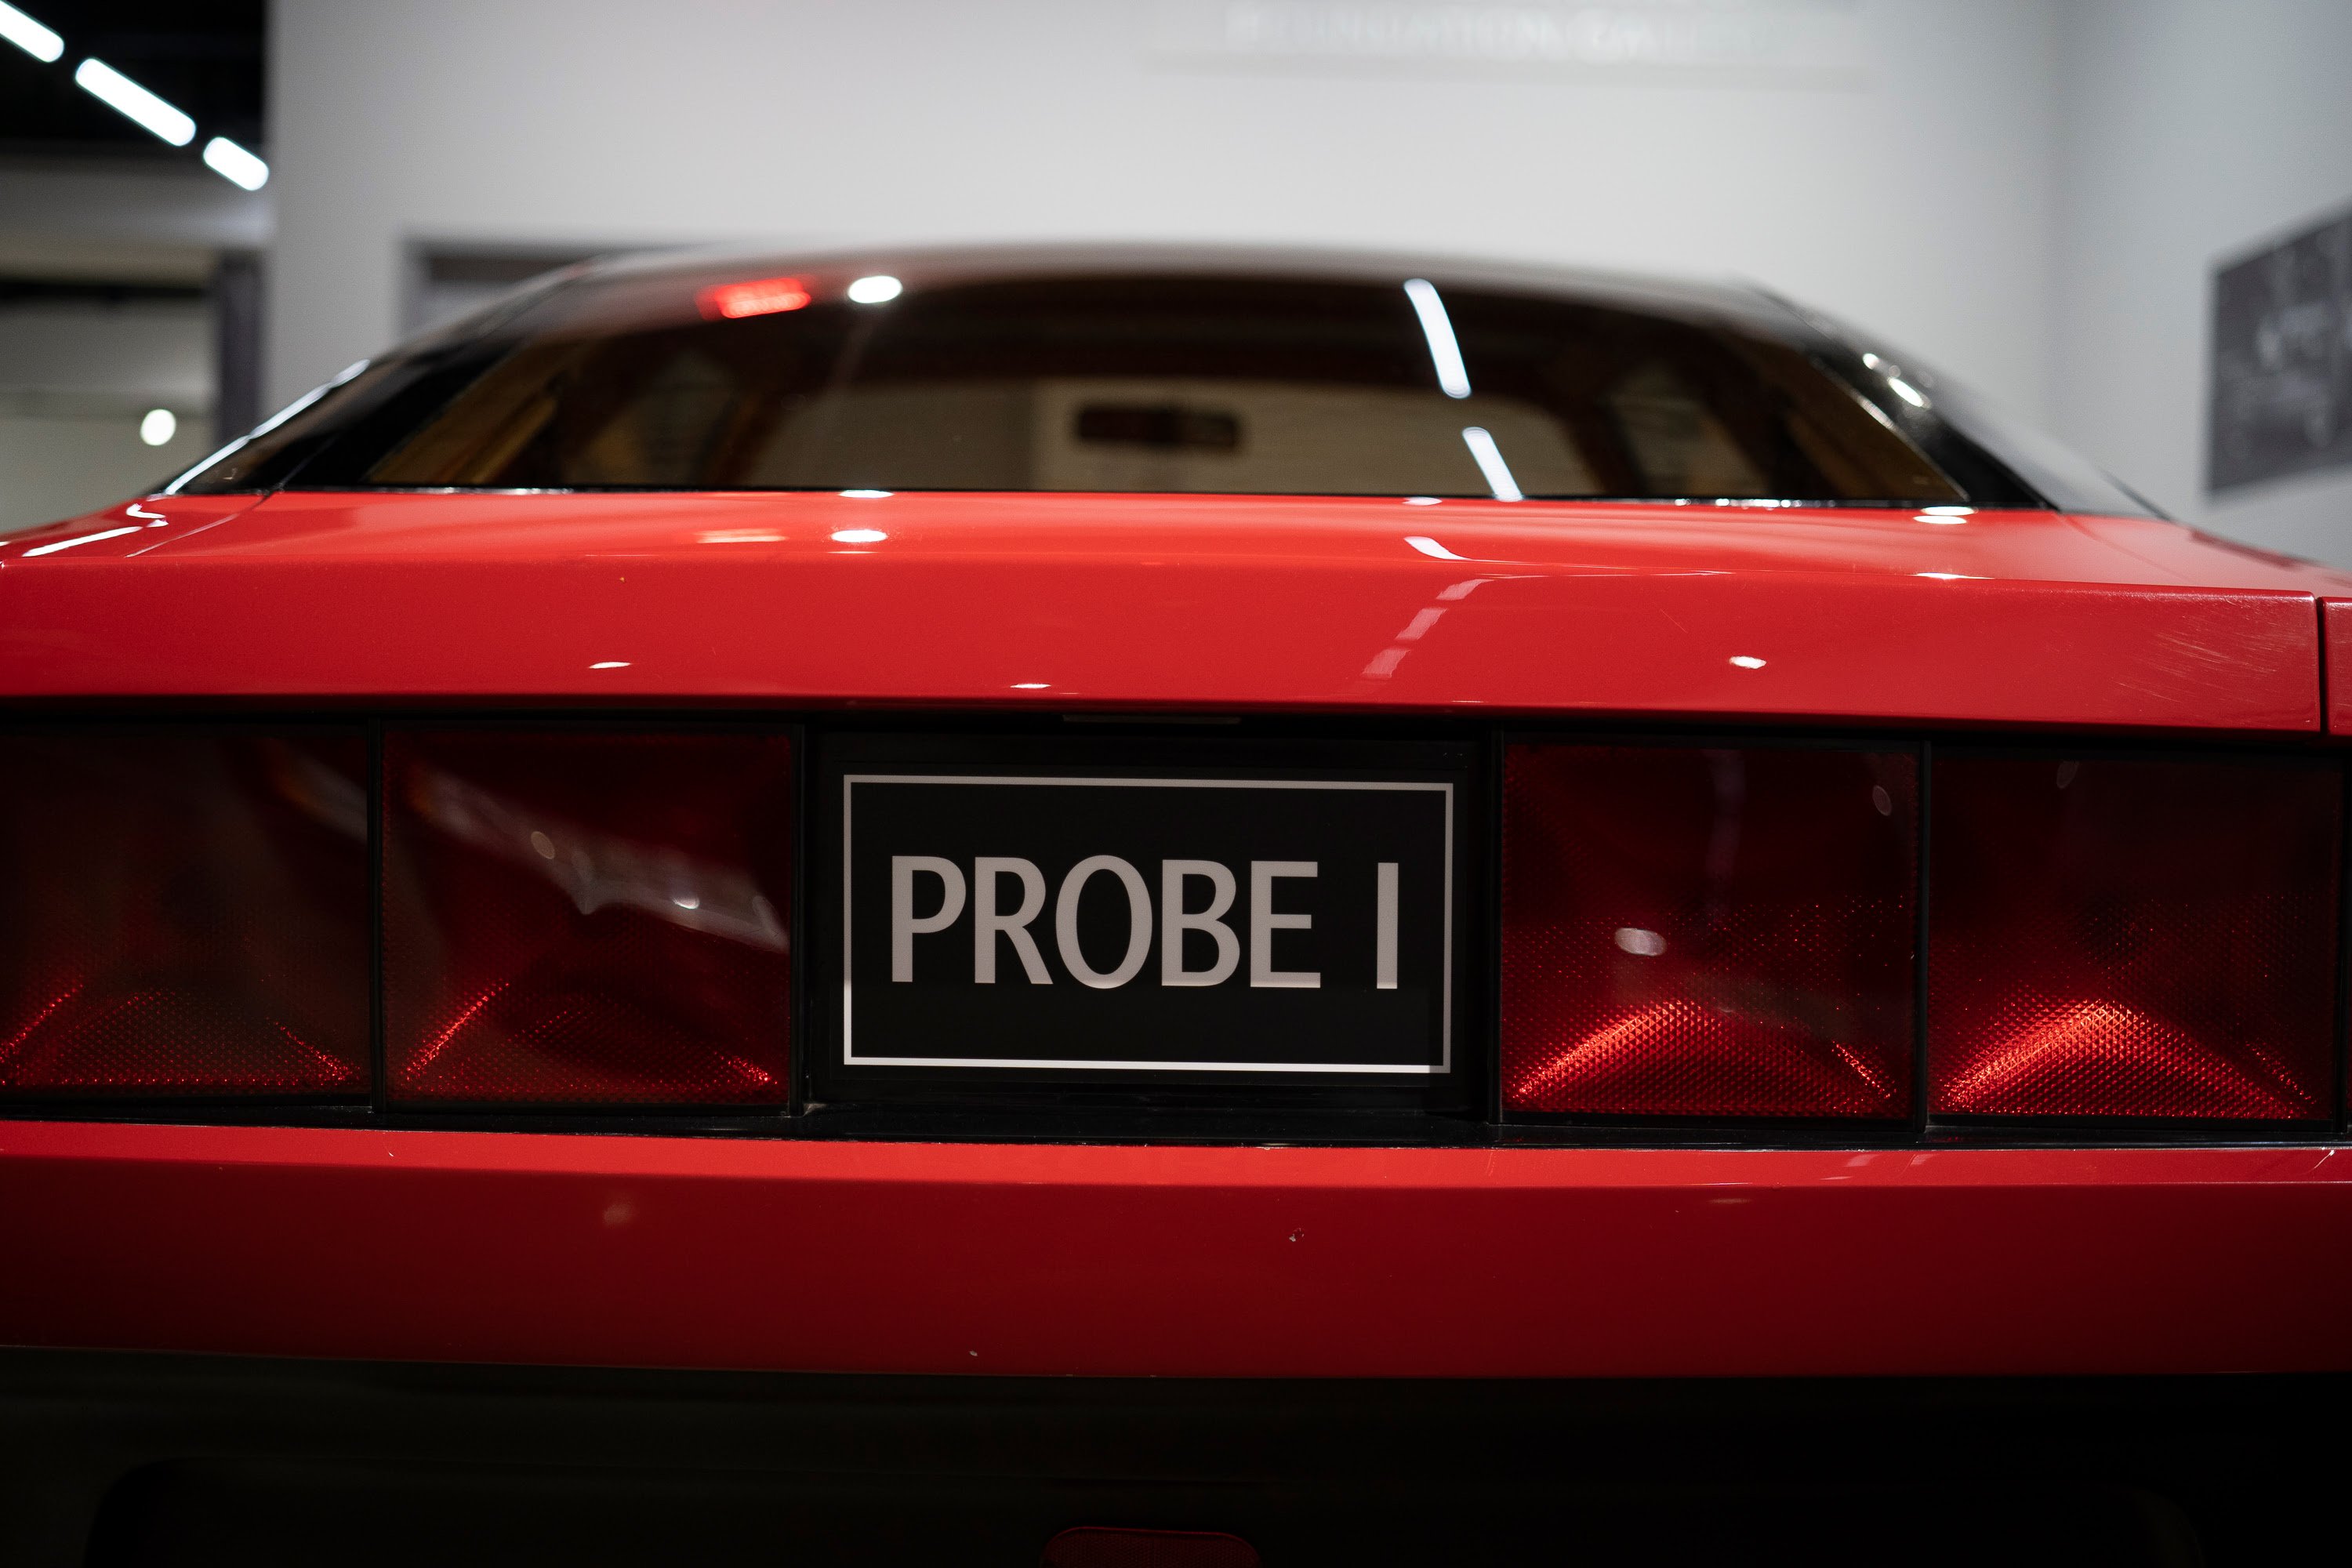 The Ford Probe I concept car at Petersen Museum.